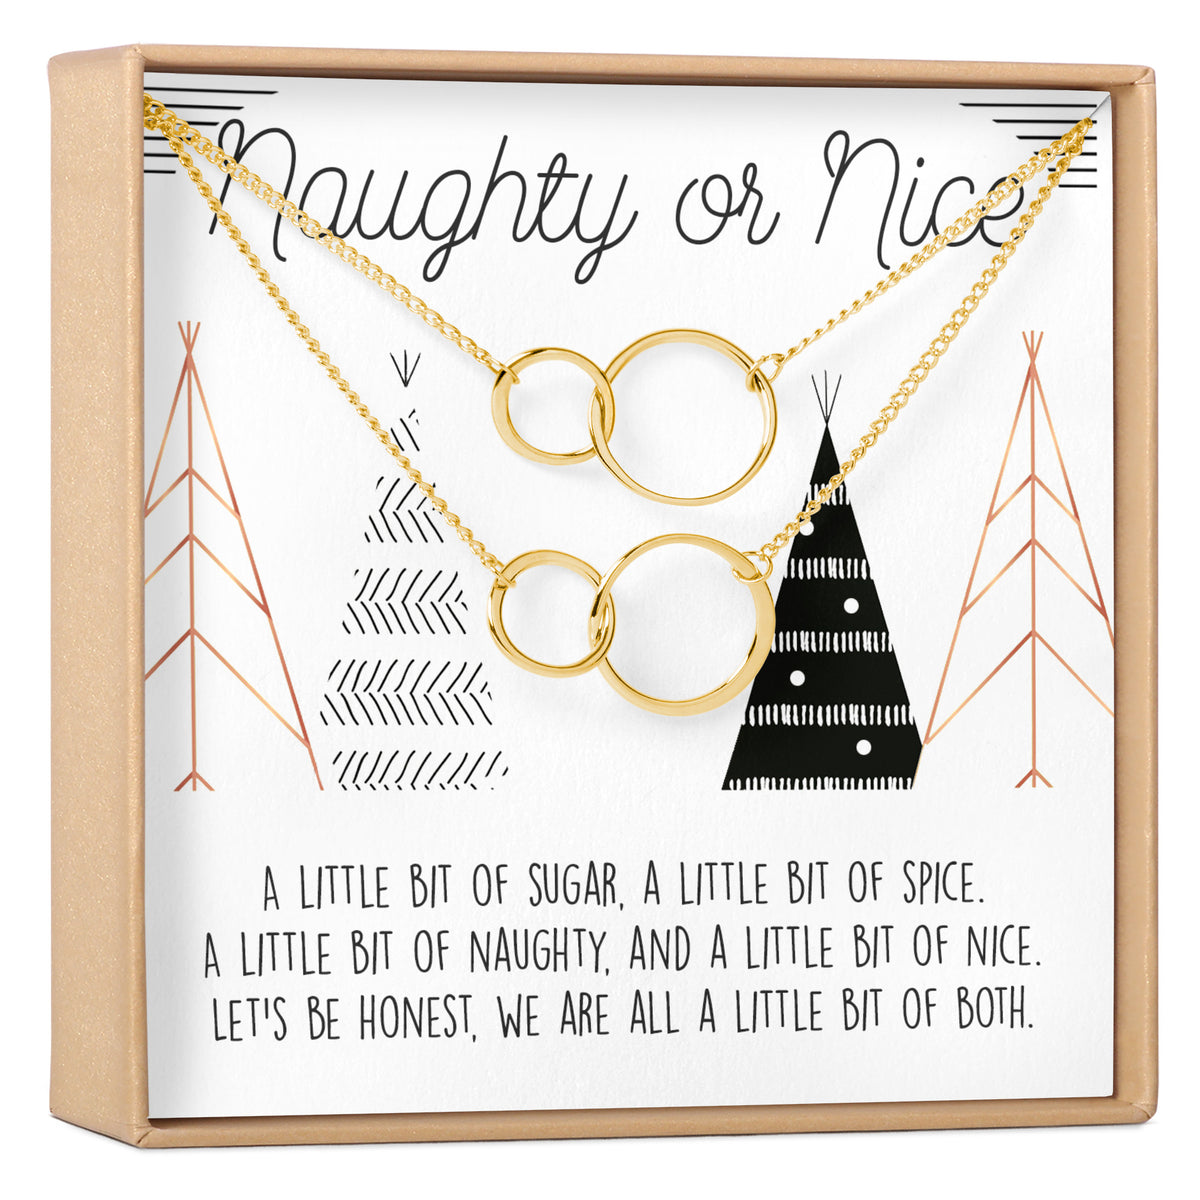 Naughty and Nice Set of 2 Double Circles Necklace Set